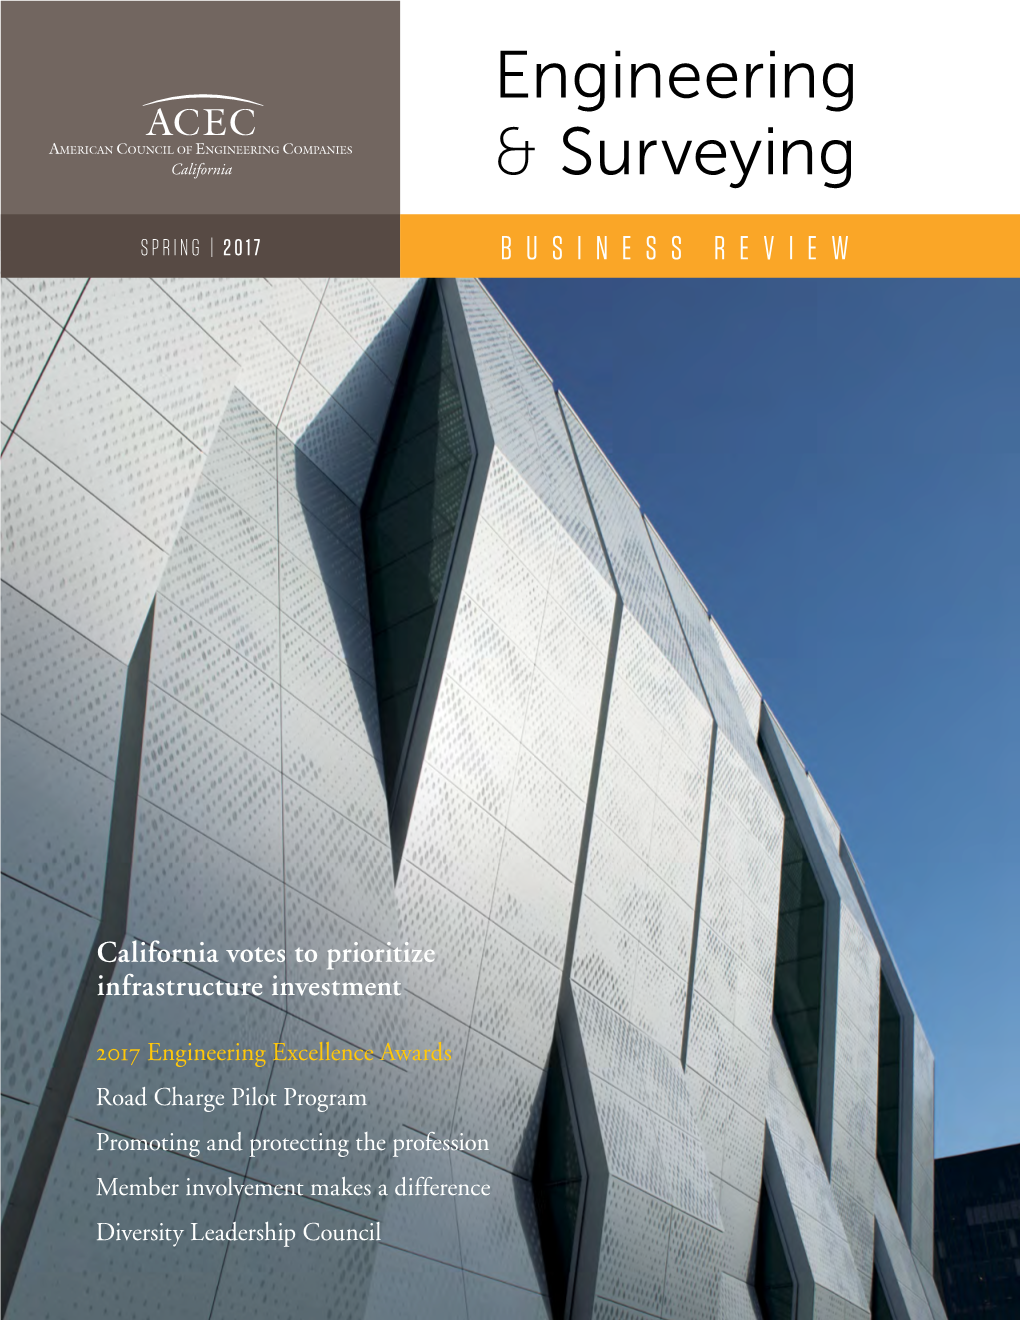 Engineering & Surveying Business Review